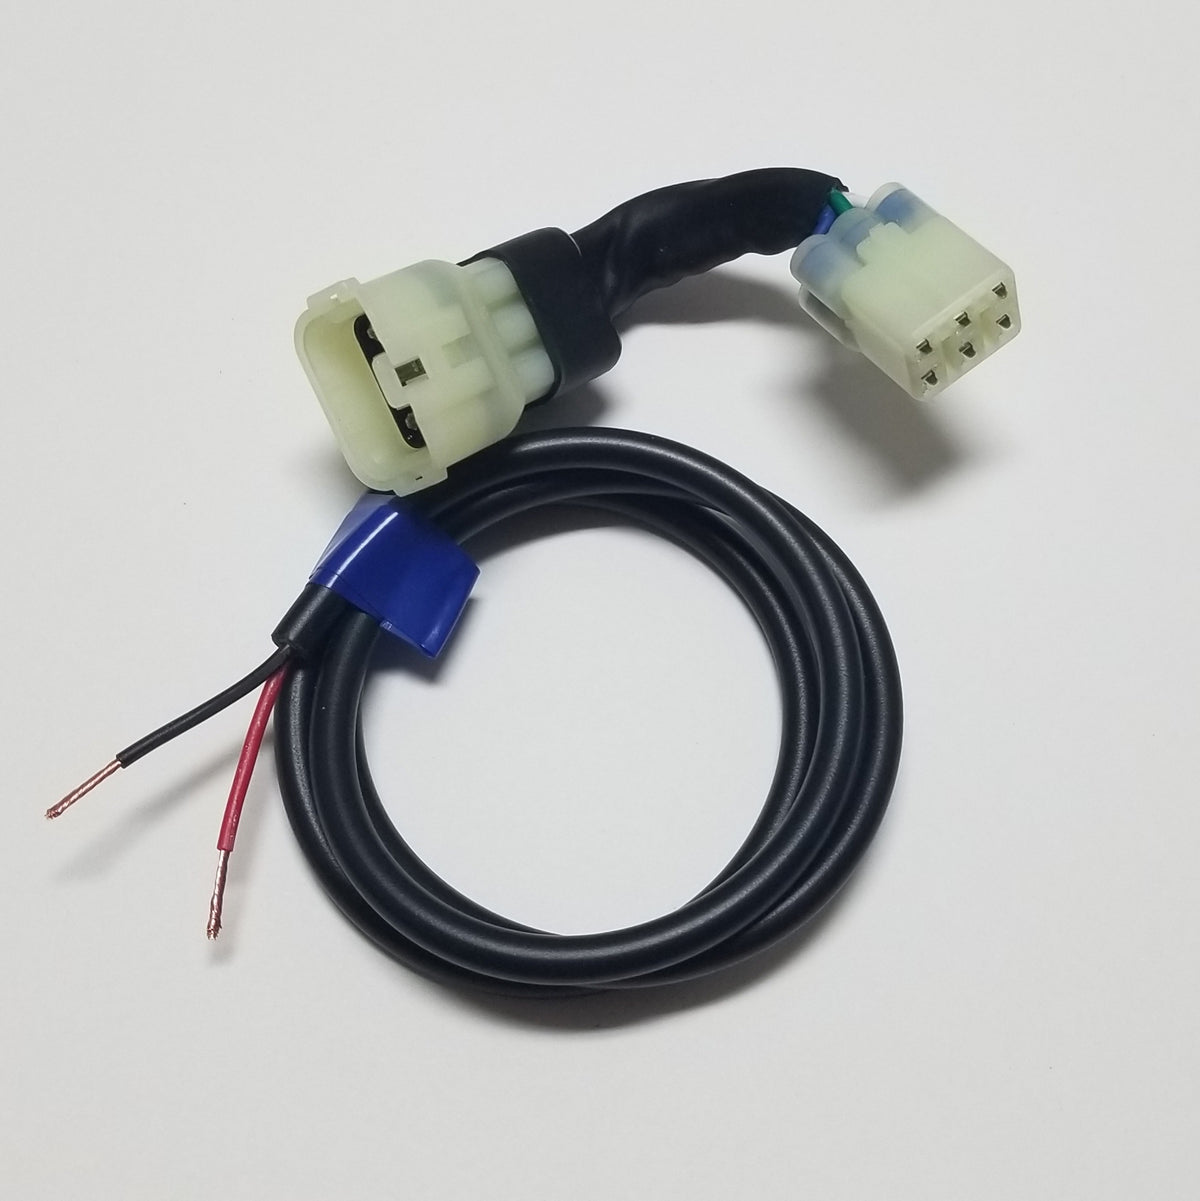 11+ Diy Wiring Harness - Diy Or Buy The Ls Standalone Harnesses Dileimma